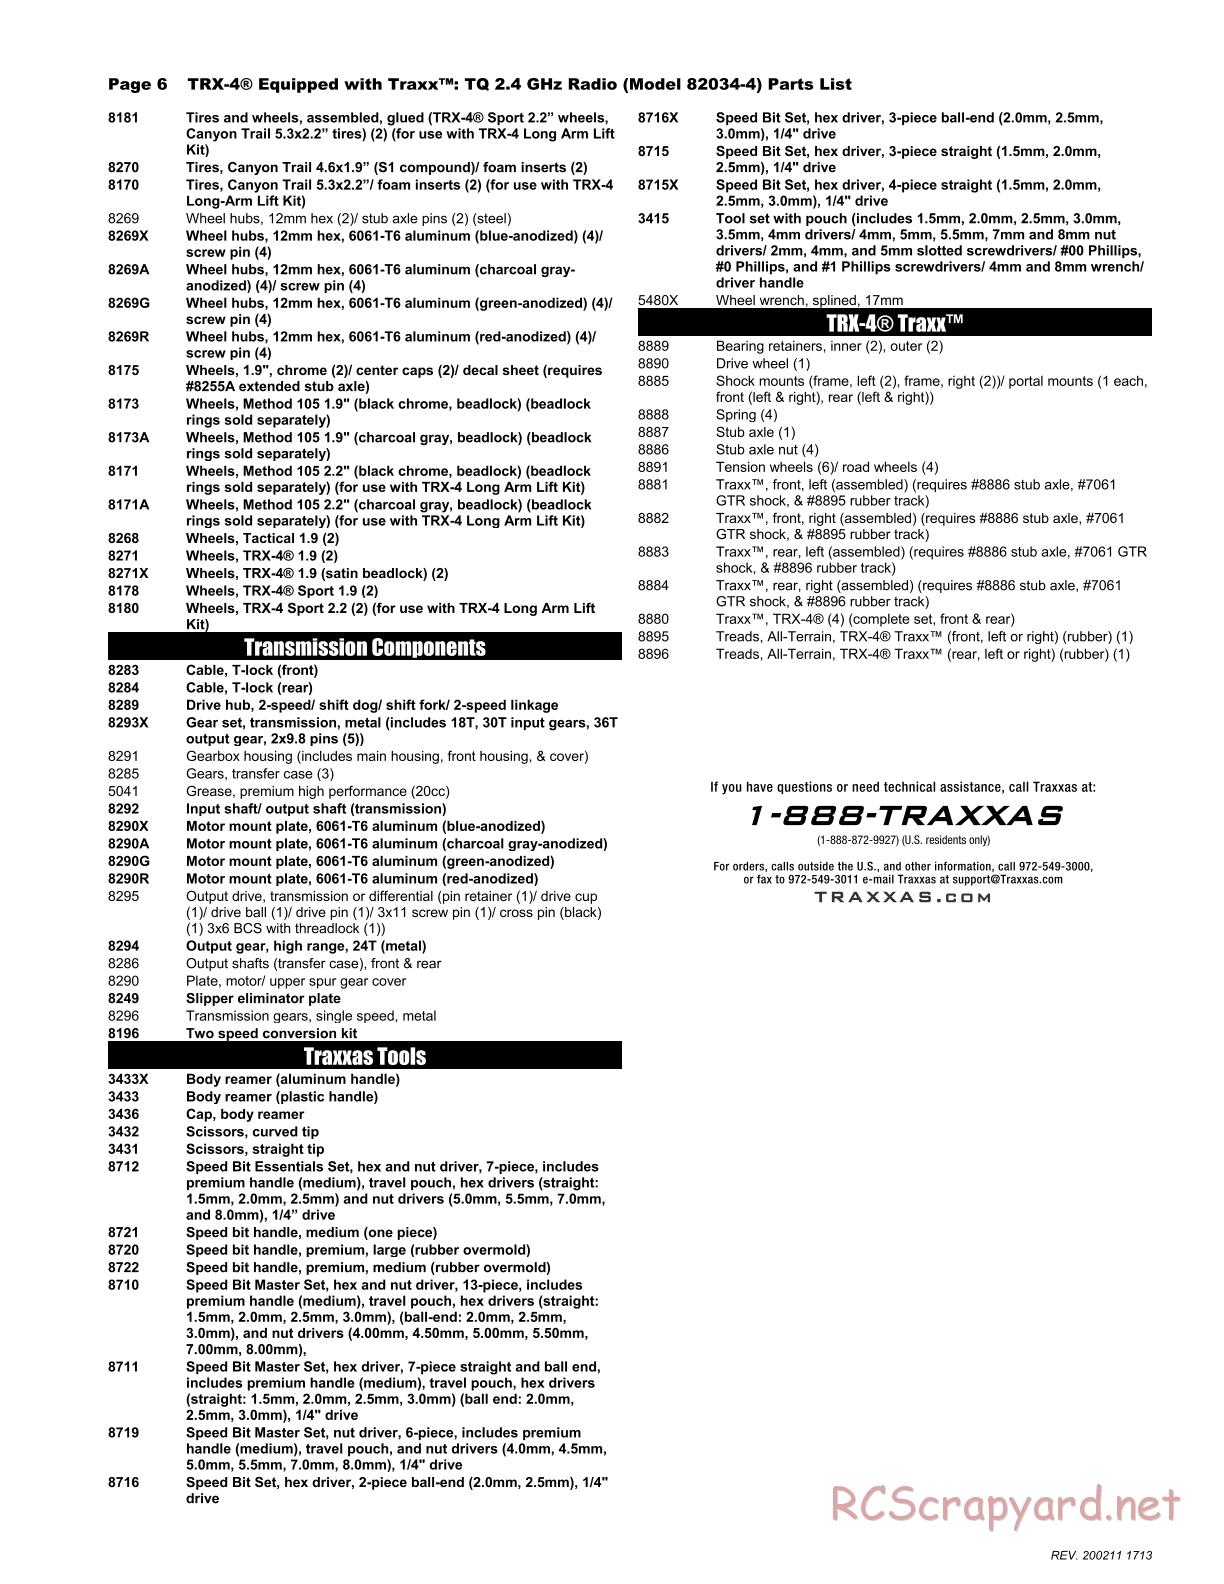 Traxxas - TRX-4 Equipped with Traxx - Parts List - Page 6